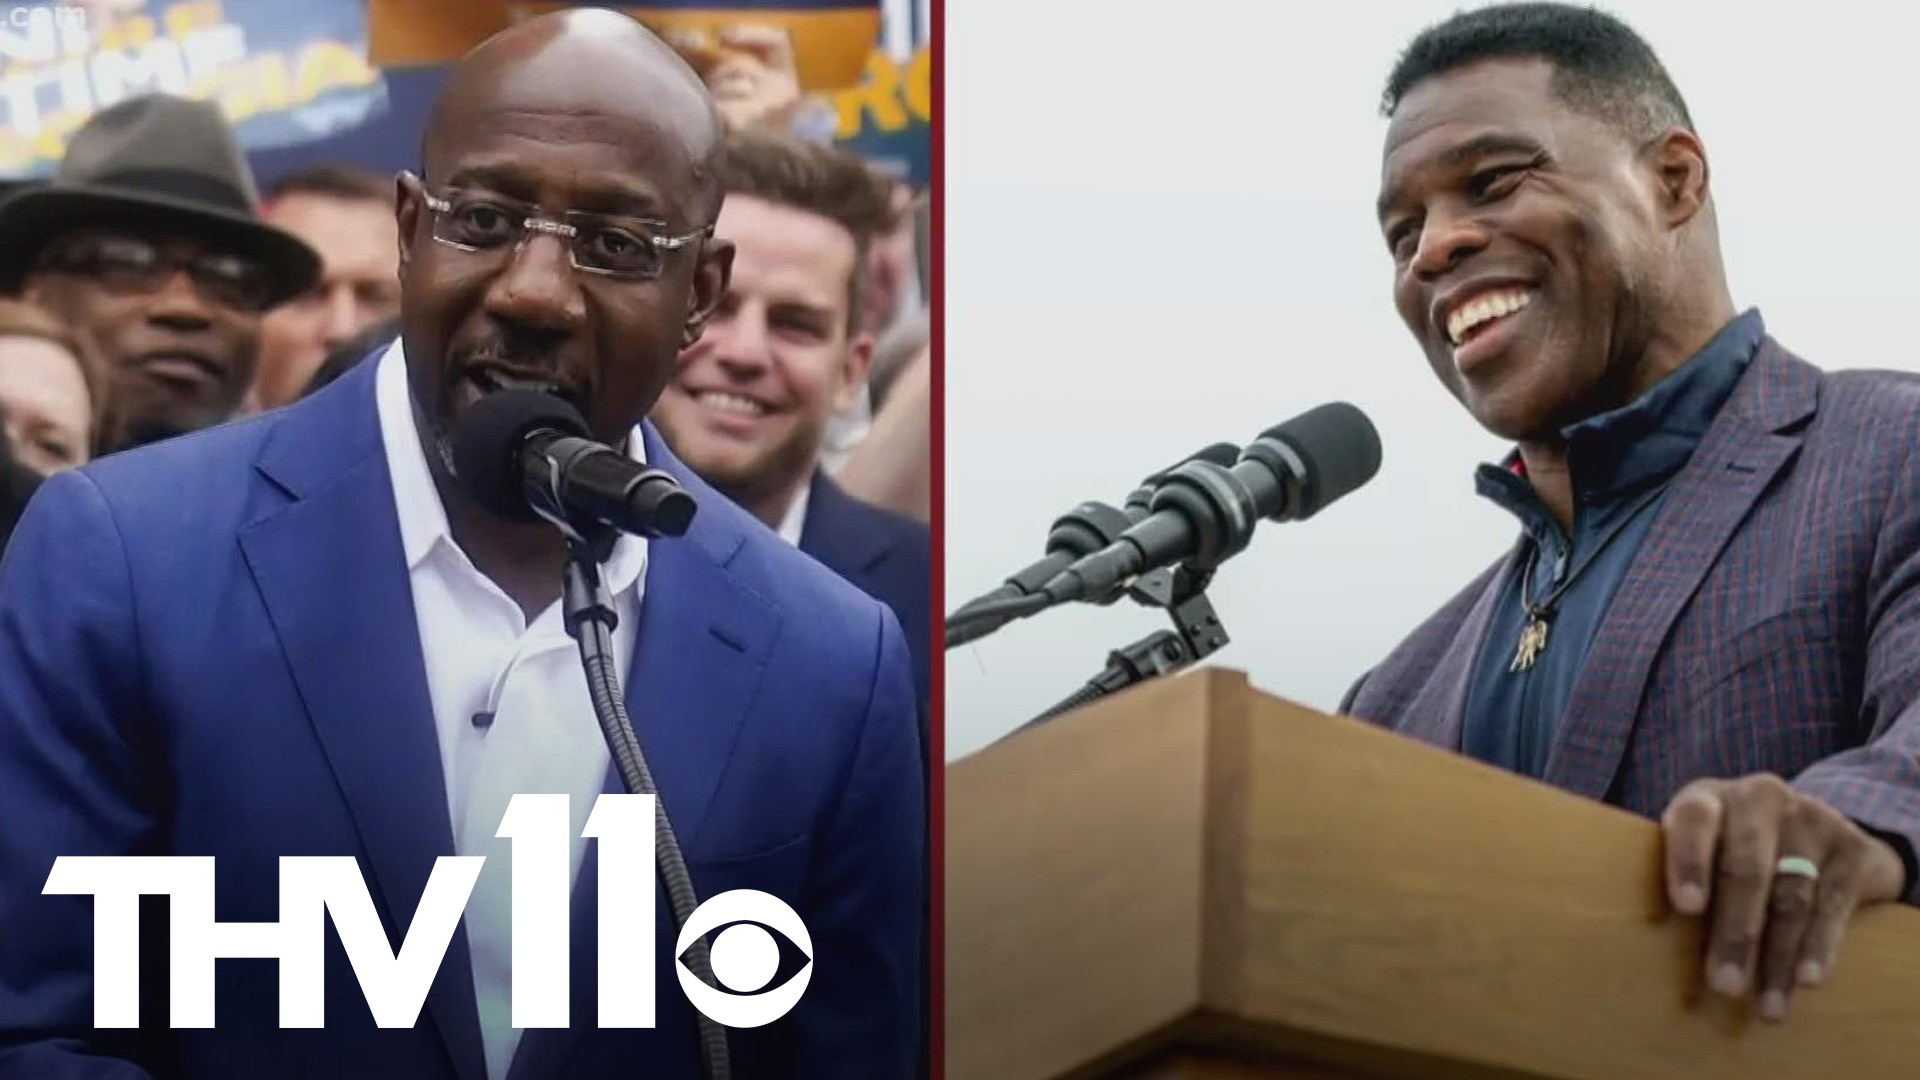 No race is more closely watched this election cycle than the Senate runoff in Georgia between Herschel Walker and incumbent Sen. Raphael Warnock.